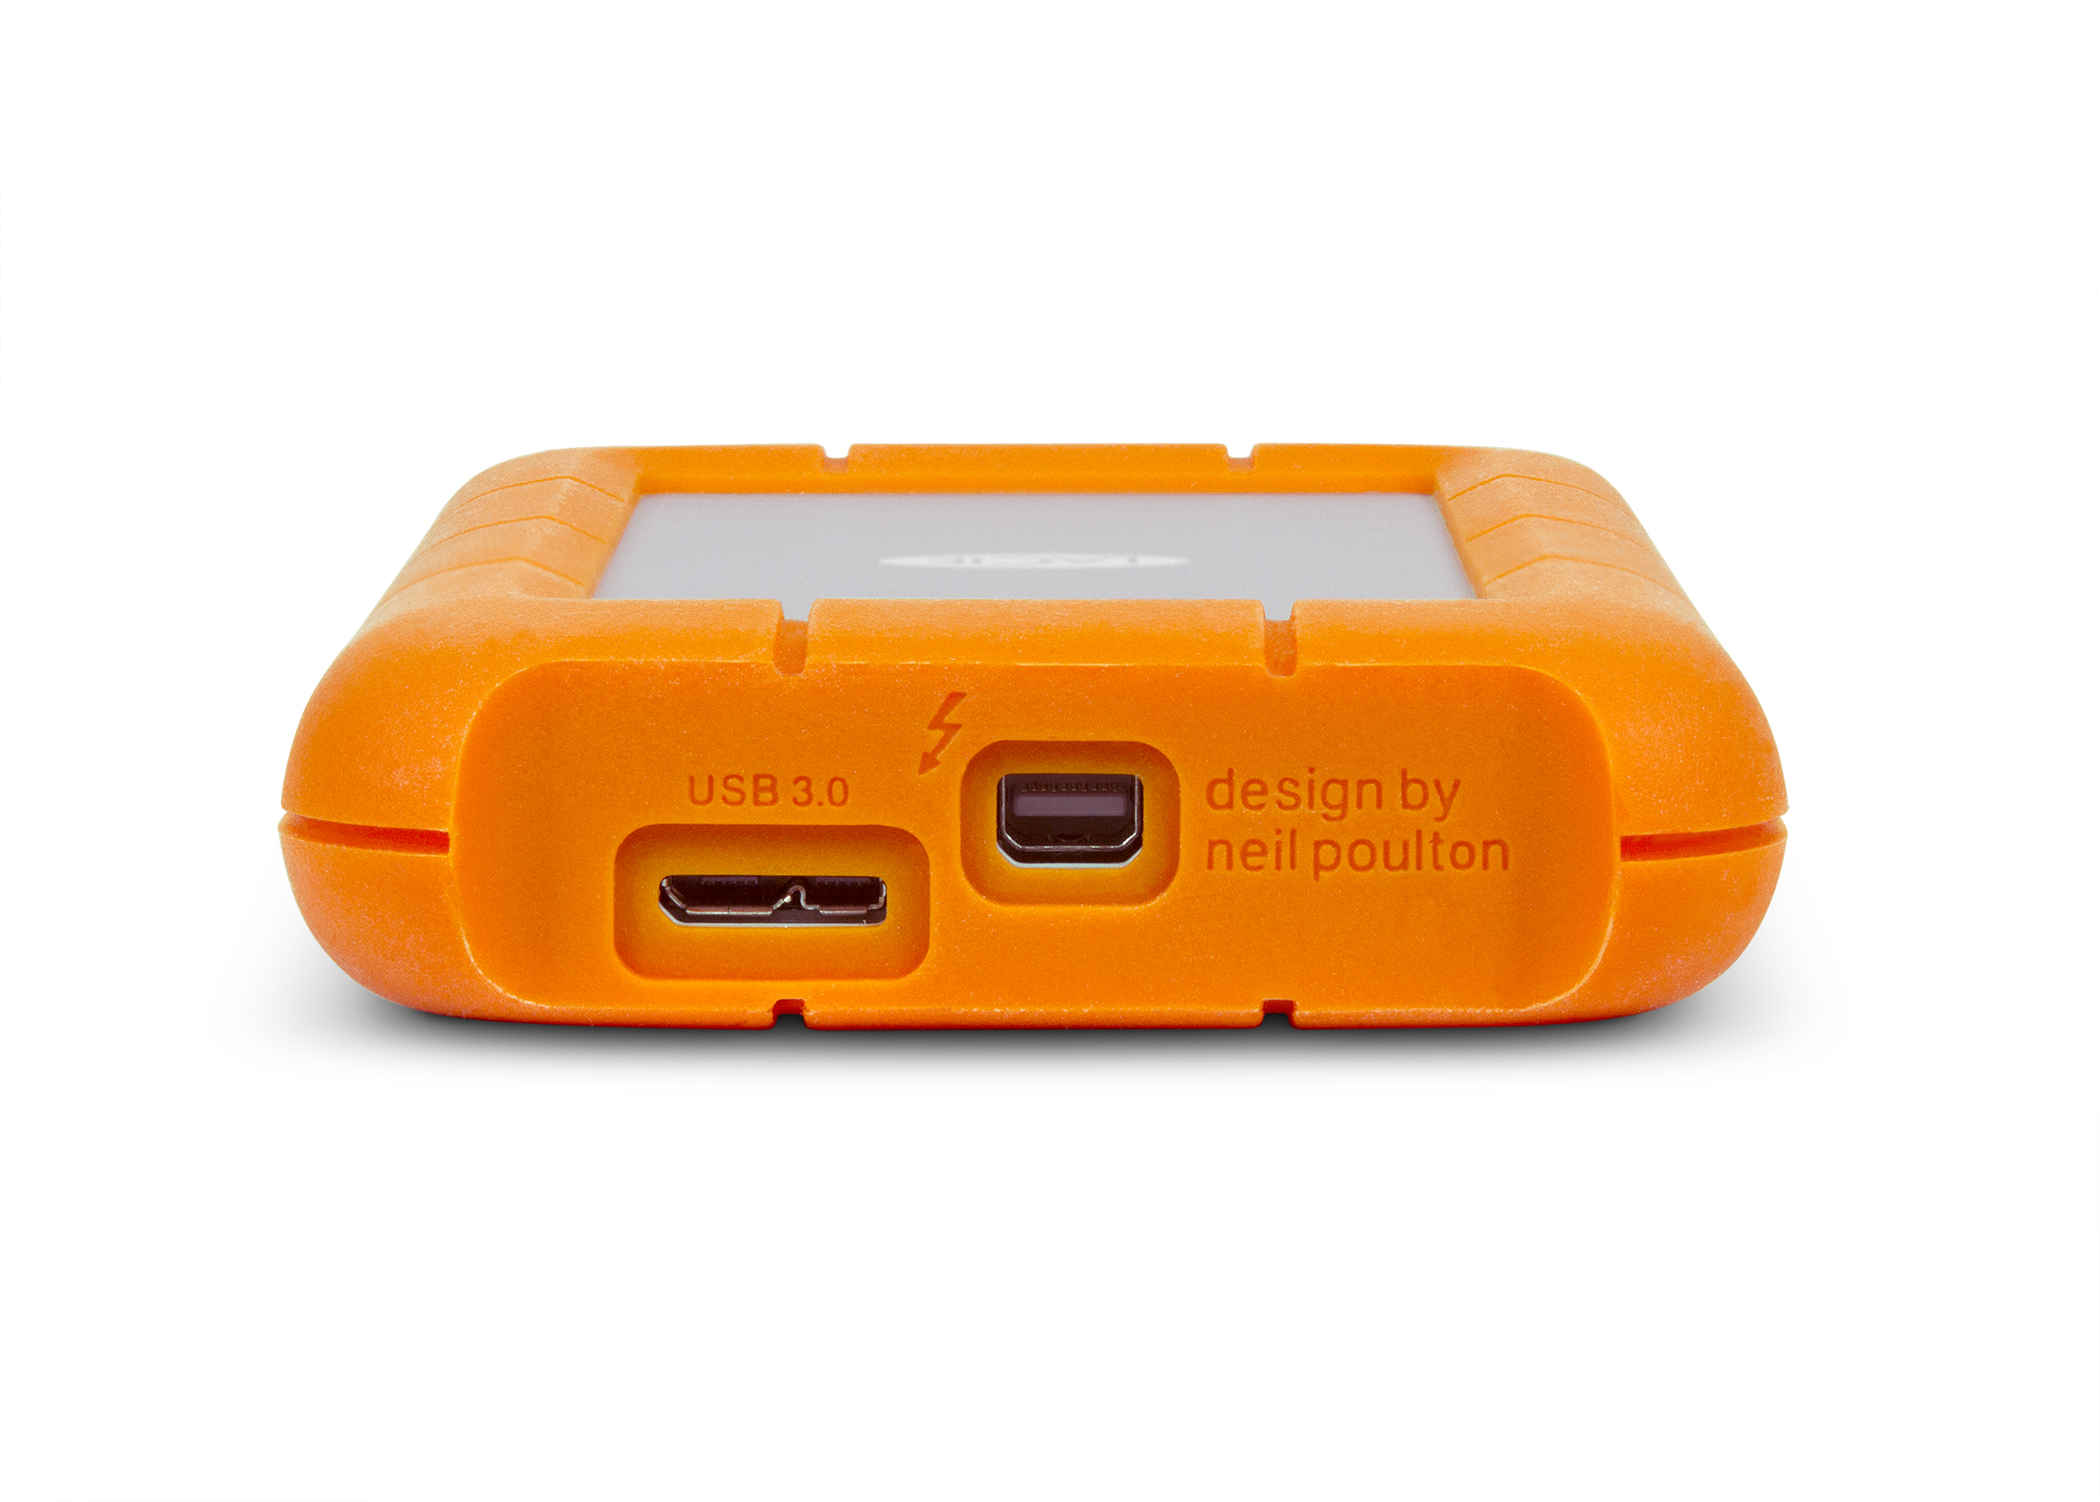 Media asset in full size related to 3dfxzone.it news item entitled as follows: USB 3.0 e Thunderbolt insieme nel nuovo drive Rugged di LaCie | Image Name: news18122_Lacie-Rugged-USB-3.0-Thunderbolt_2.jpg